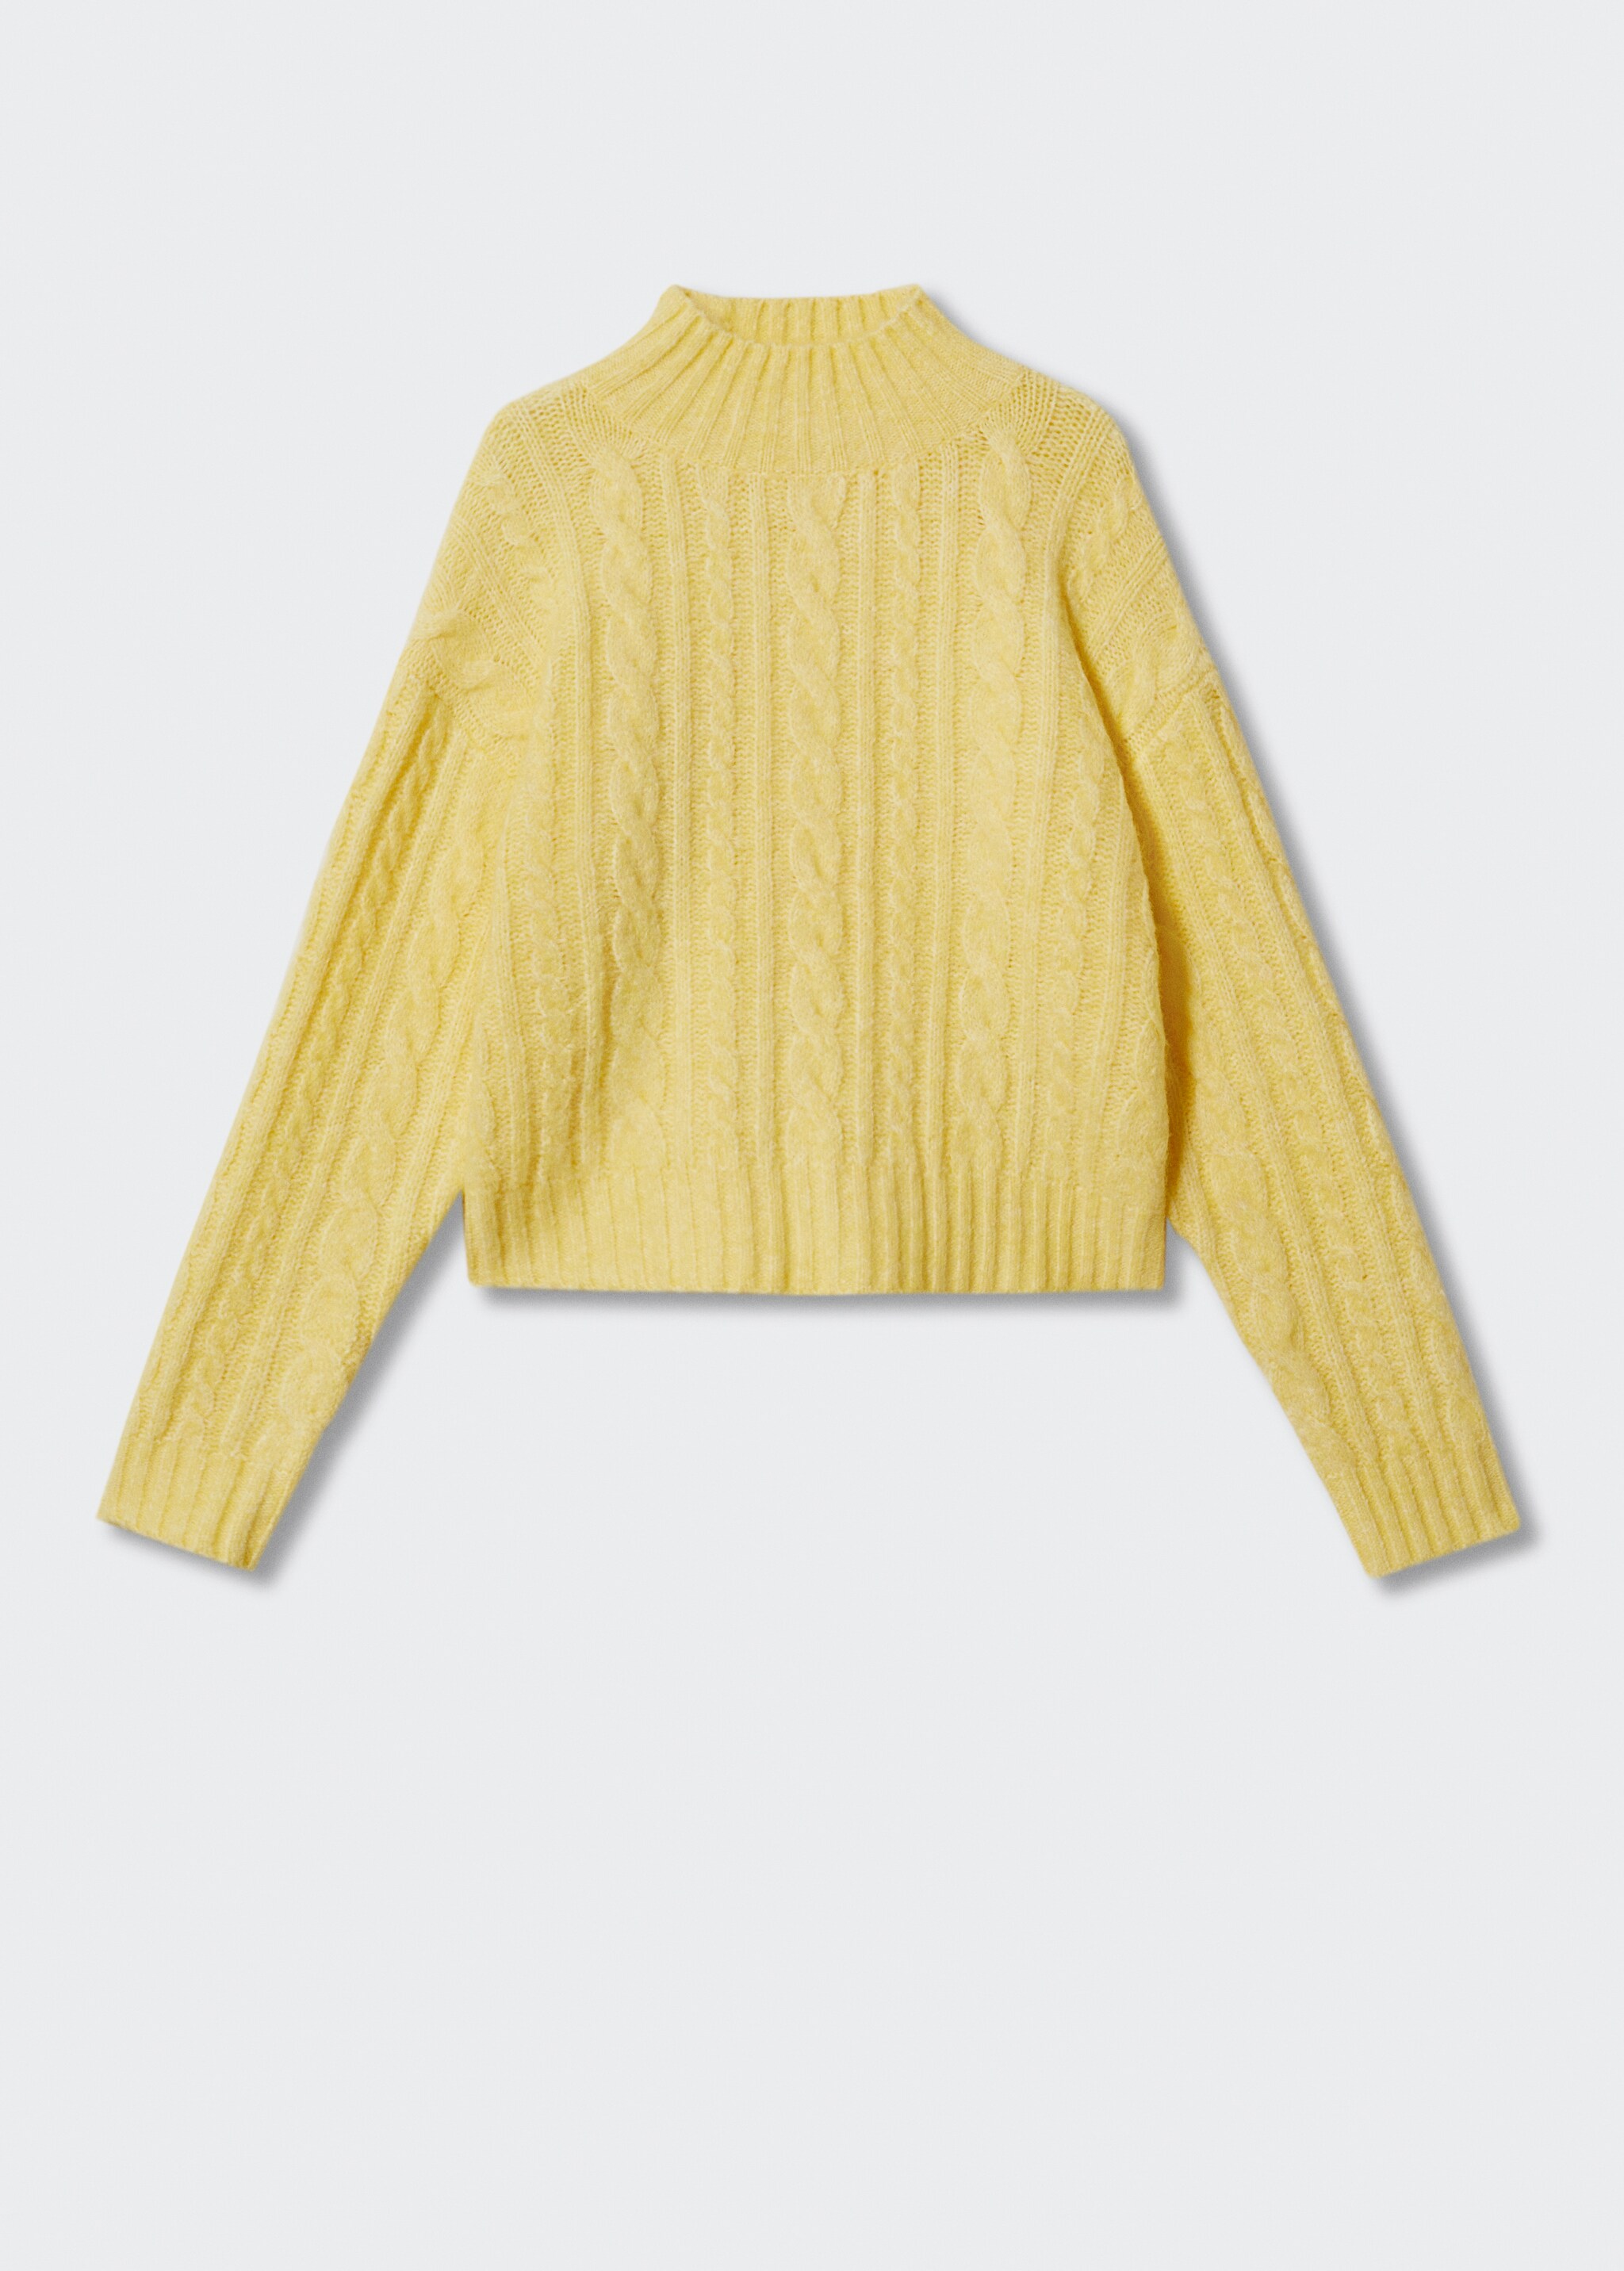 Braided sweater with perkins neck - Article without model